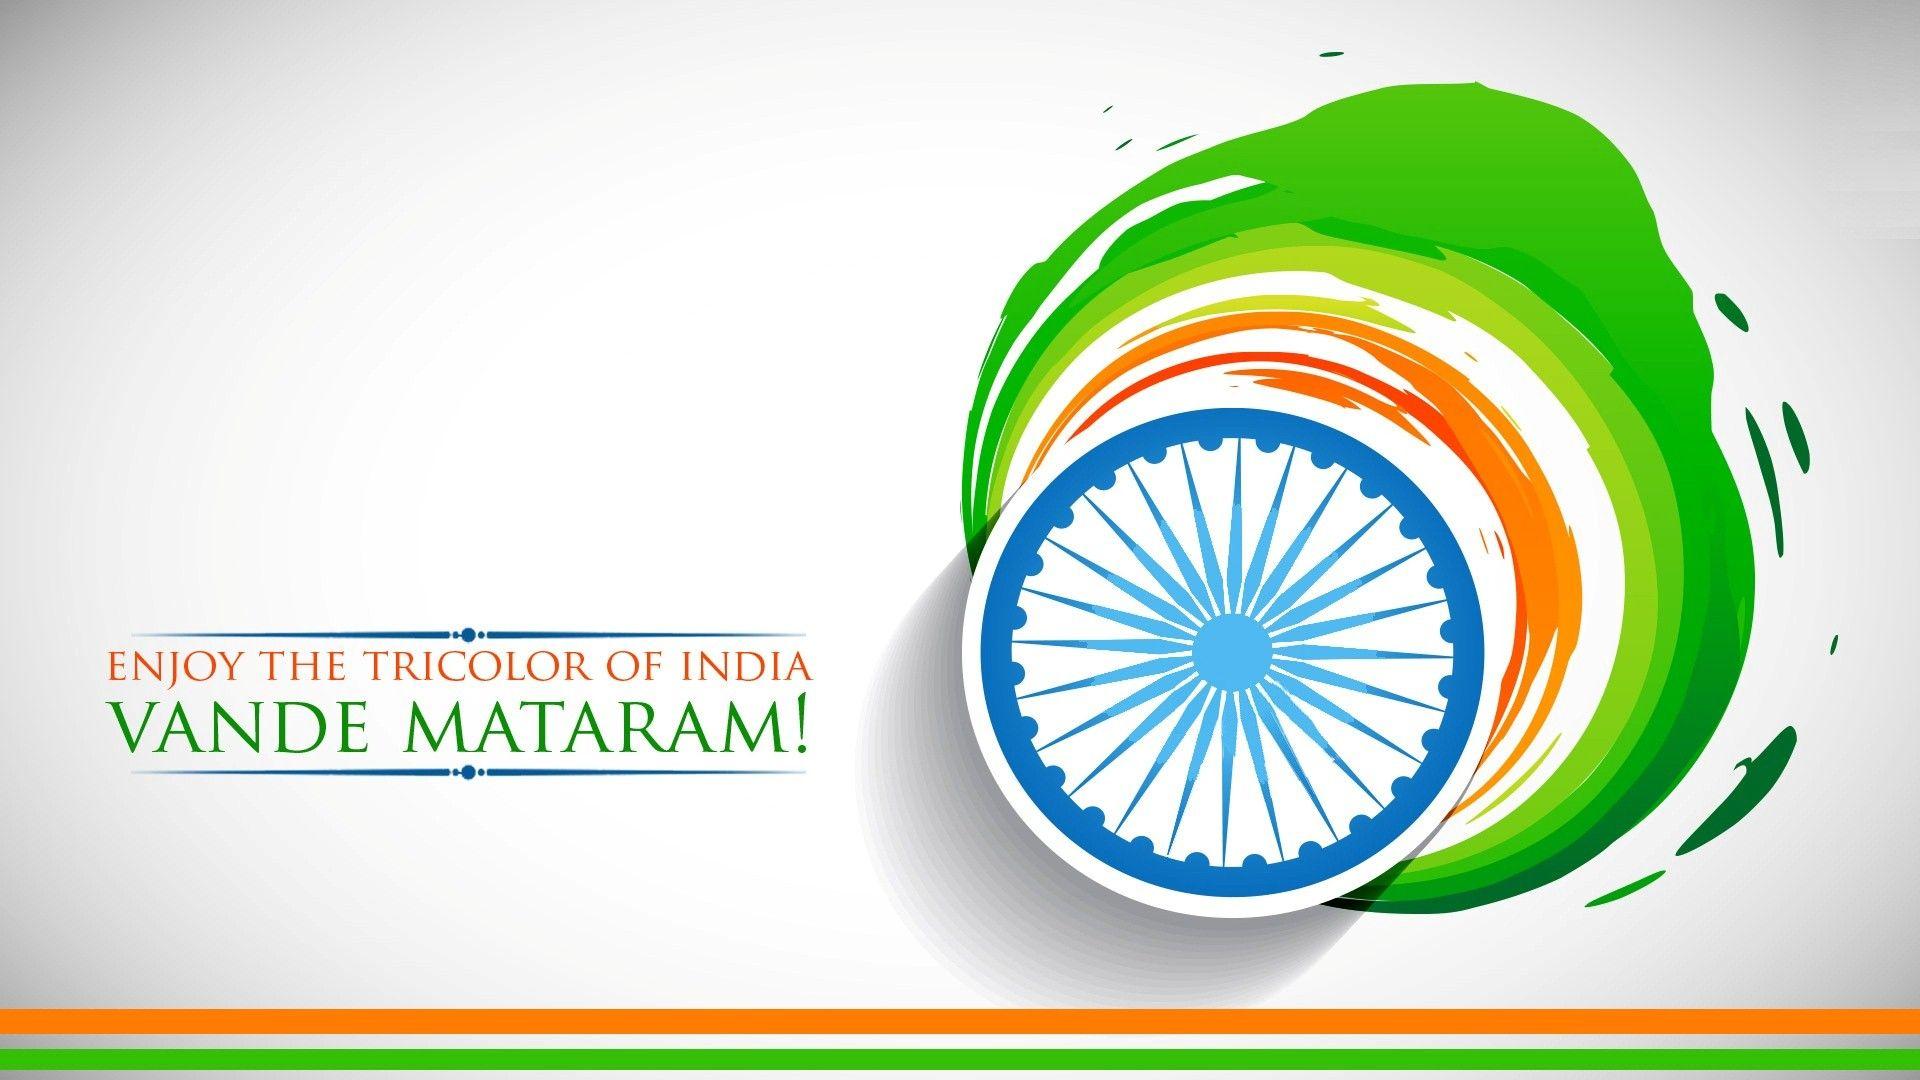 15th August Happy Independence Day of INDIA Wishes Wallpaper. HD